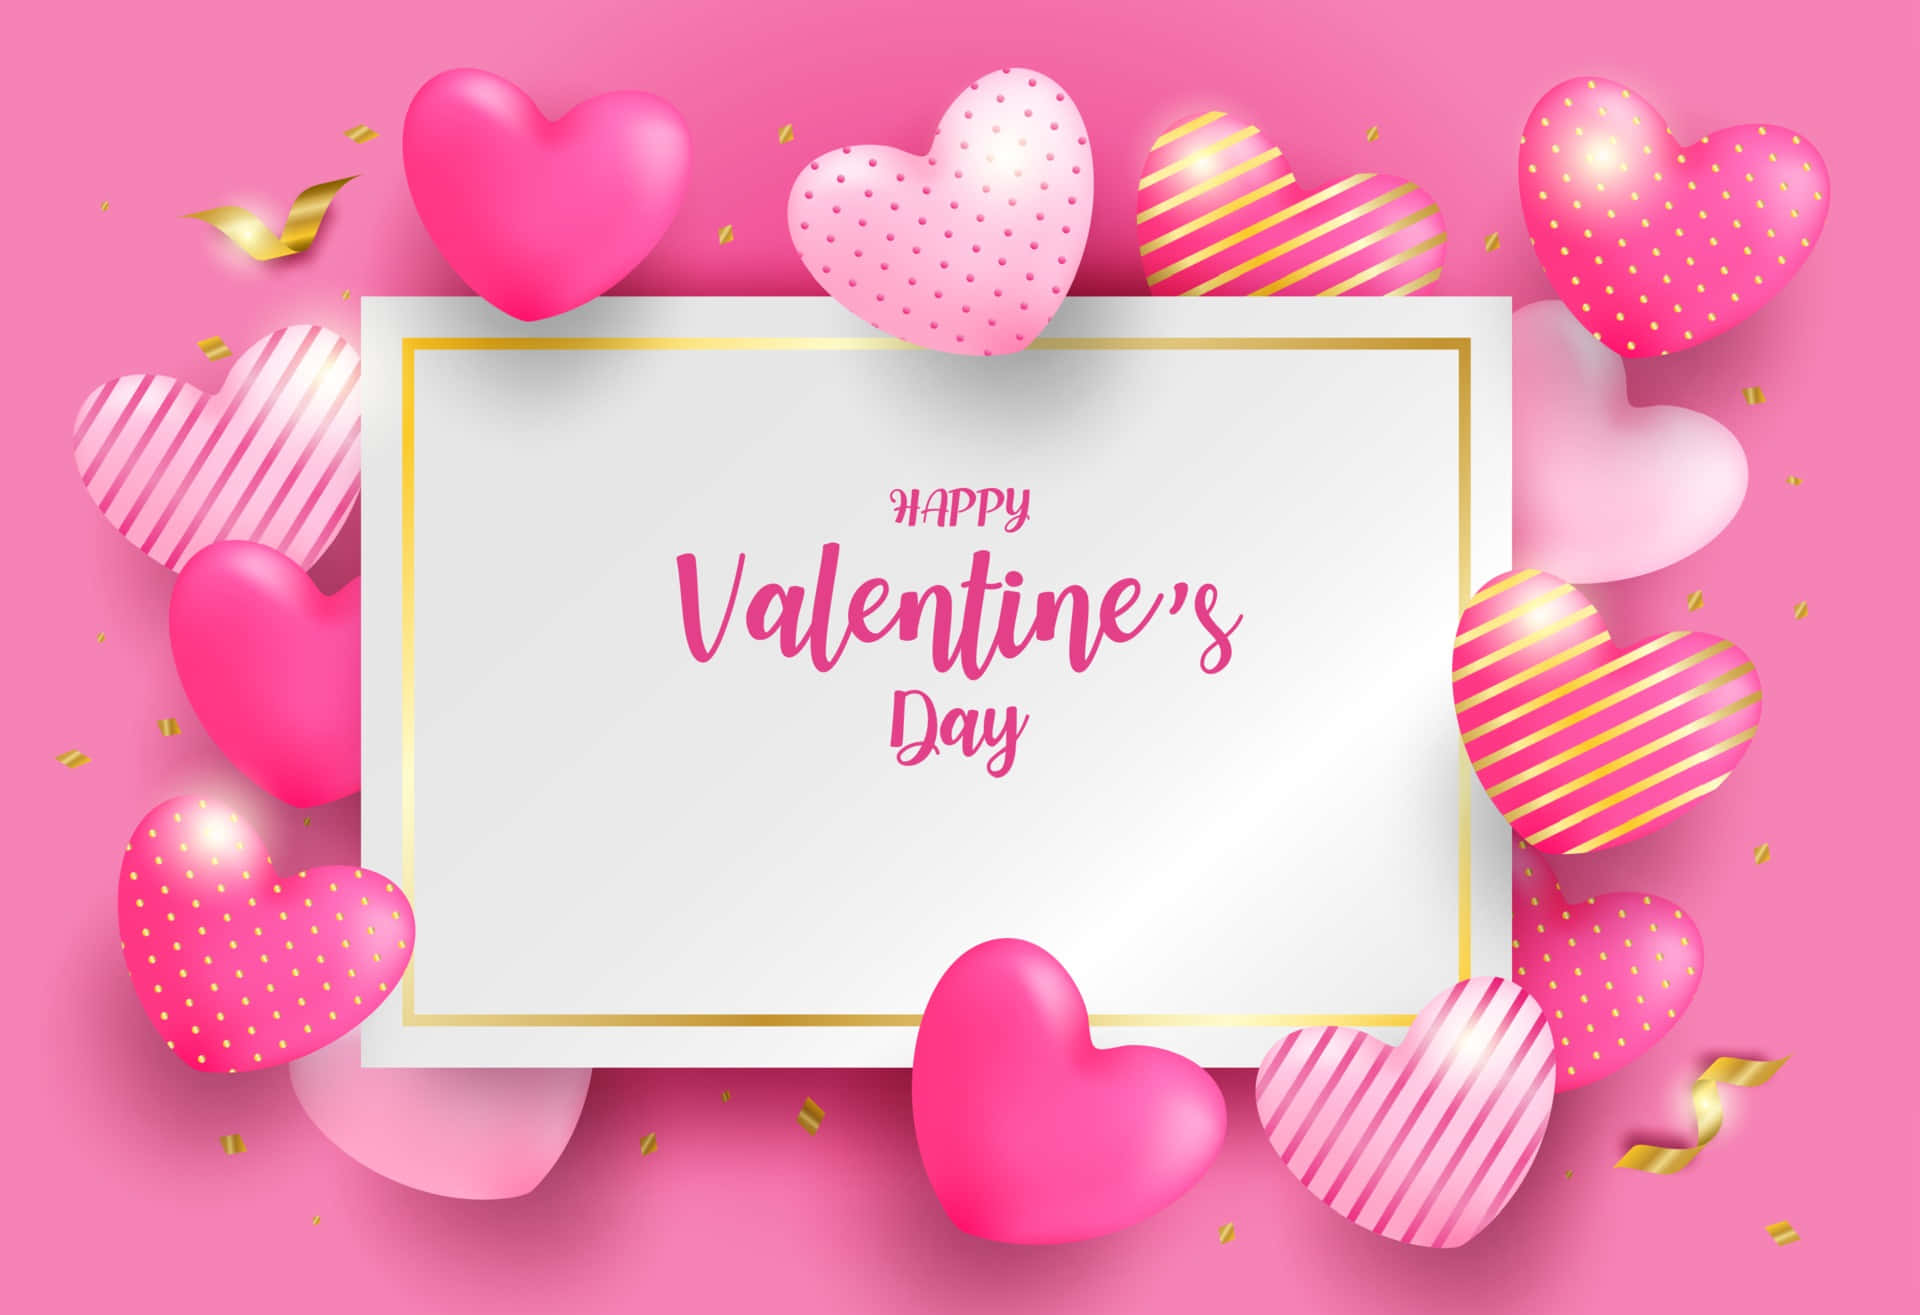 Romantic Valentine's Day Background with Hearts and Roses